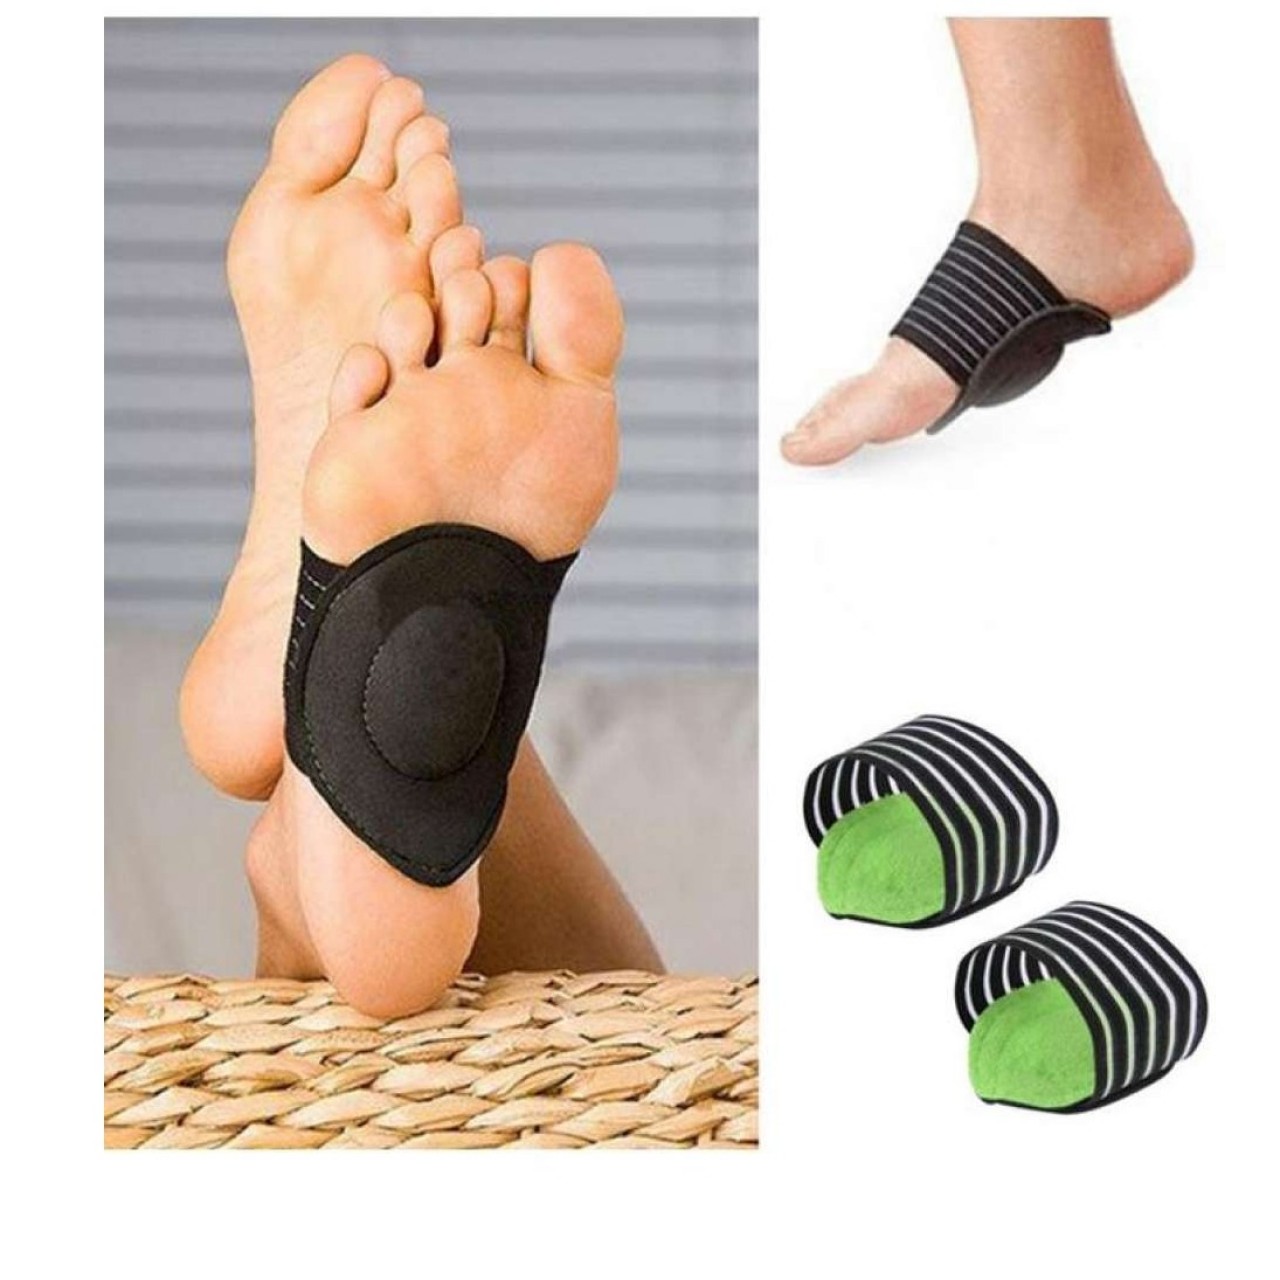 Strutz Arch Support - Relief Achy Tired Pain - Sale price - Buy online ...